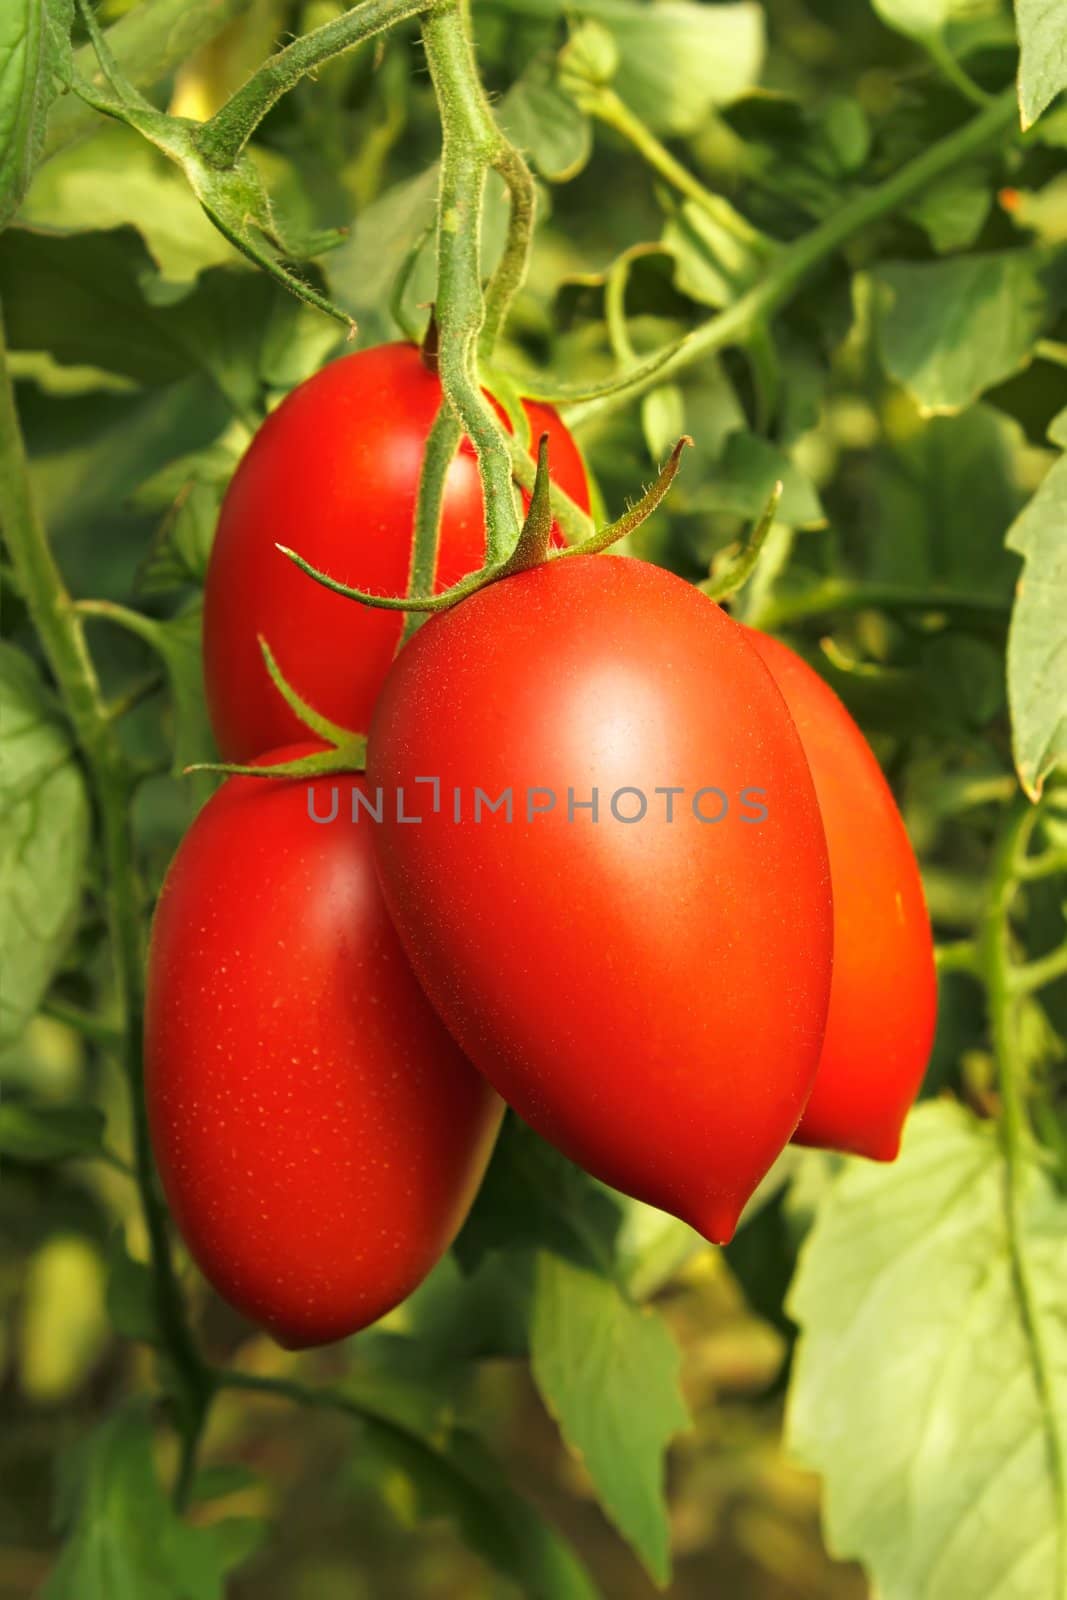 Ripe red tomatoes by qiiip